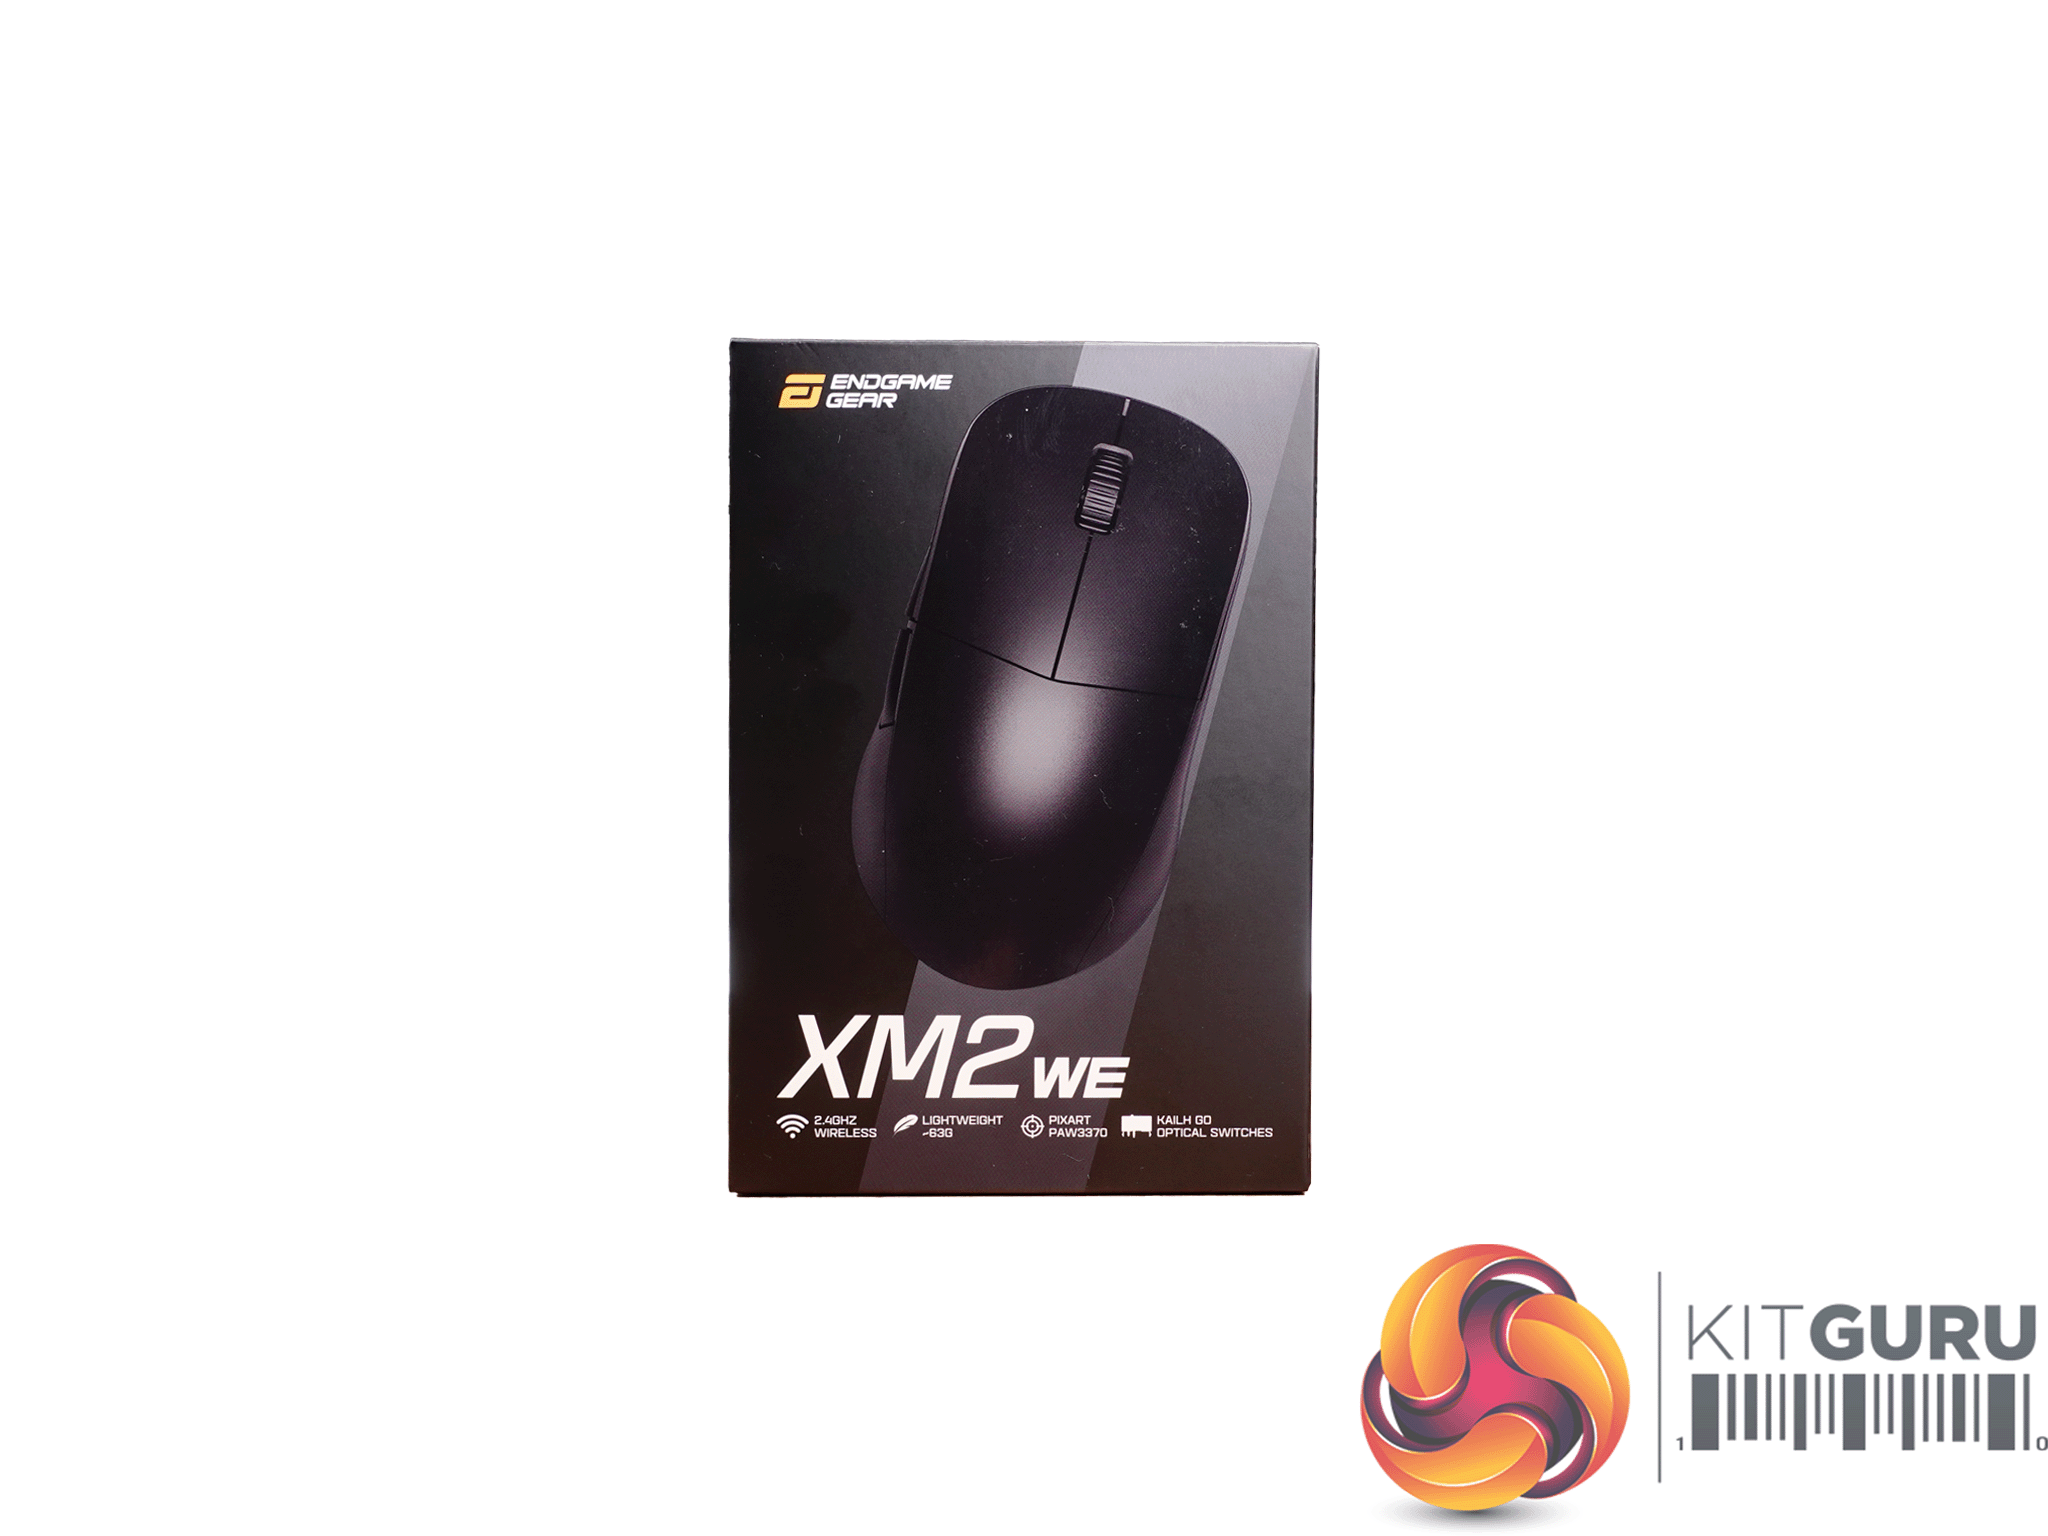 Endgame Gear XM2WE Gaming Mouse Review 